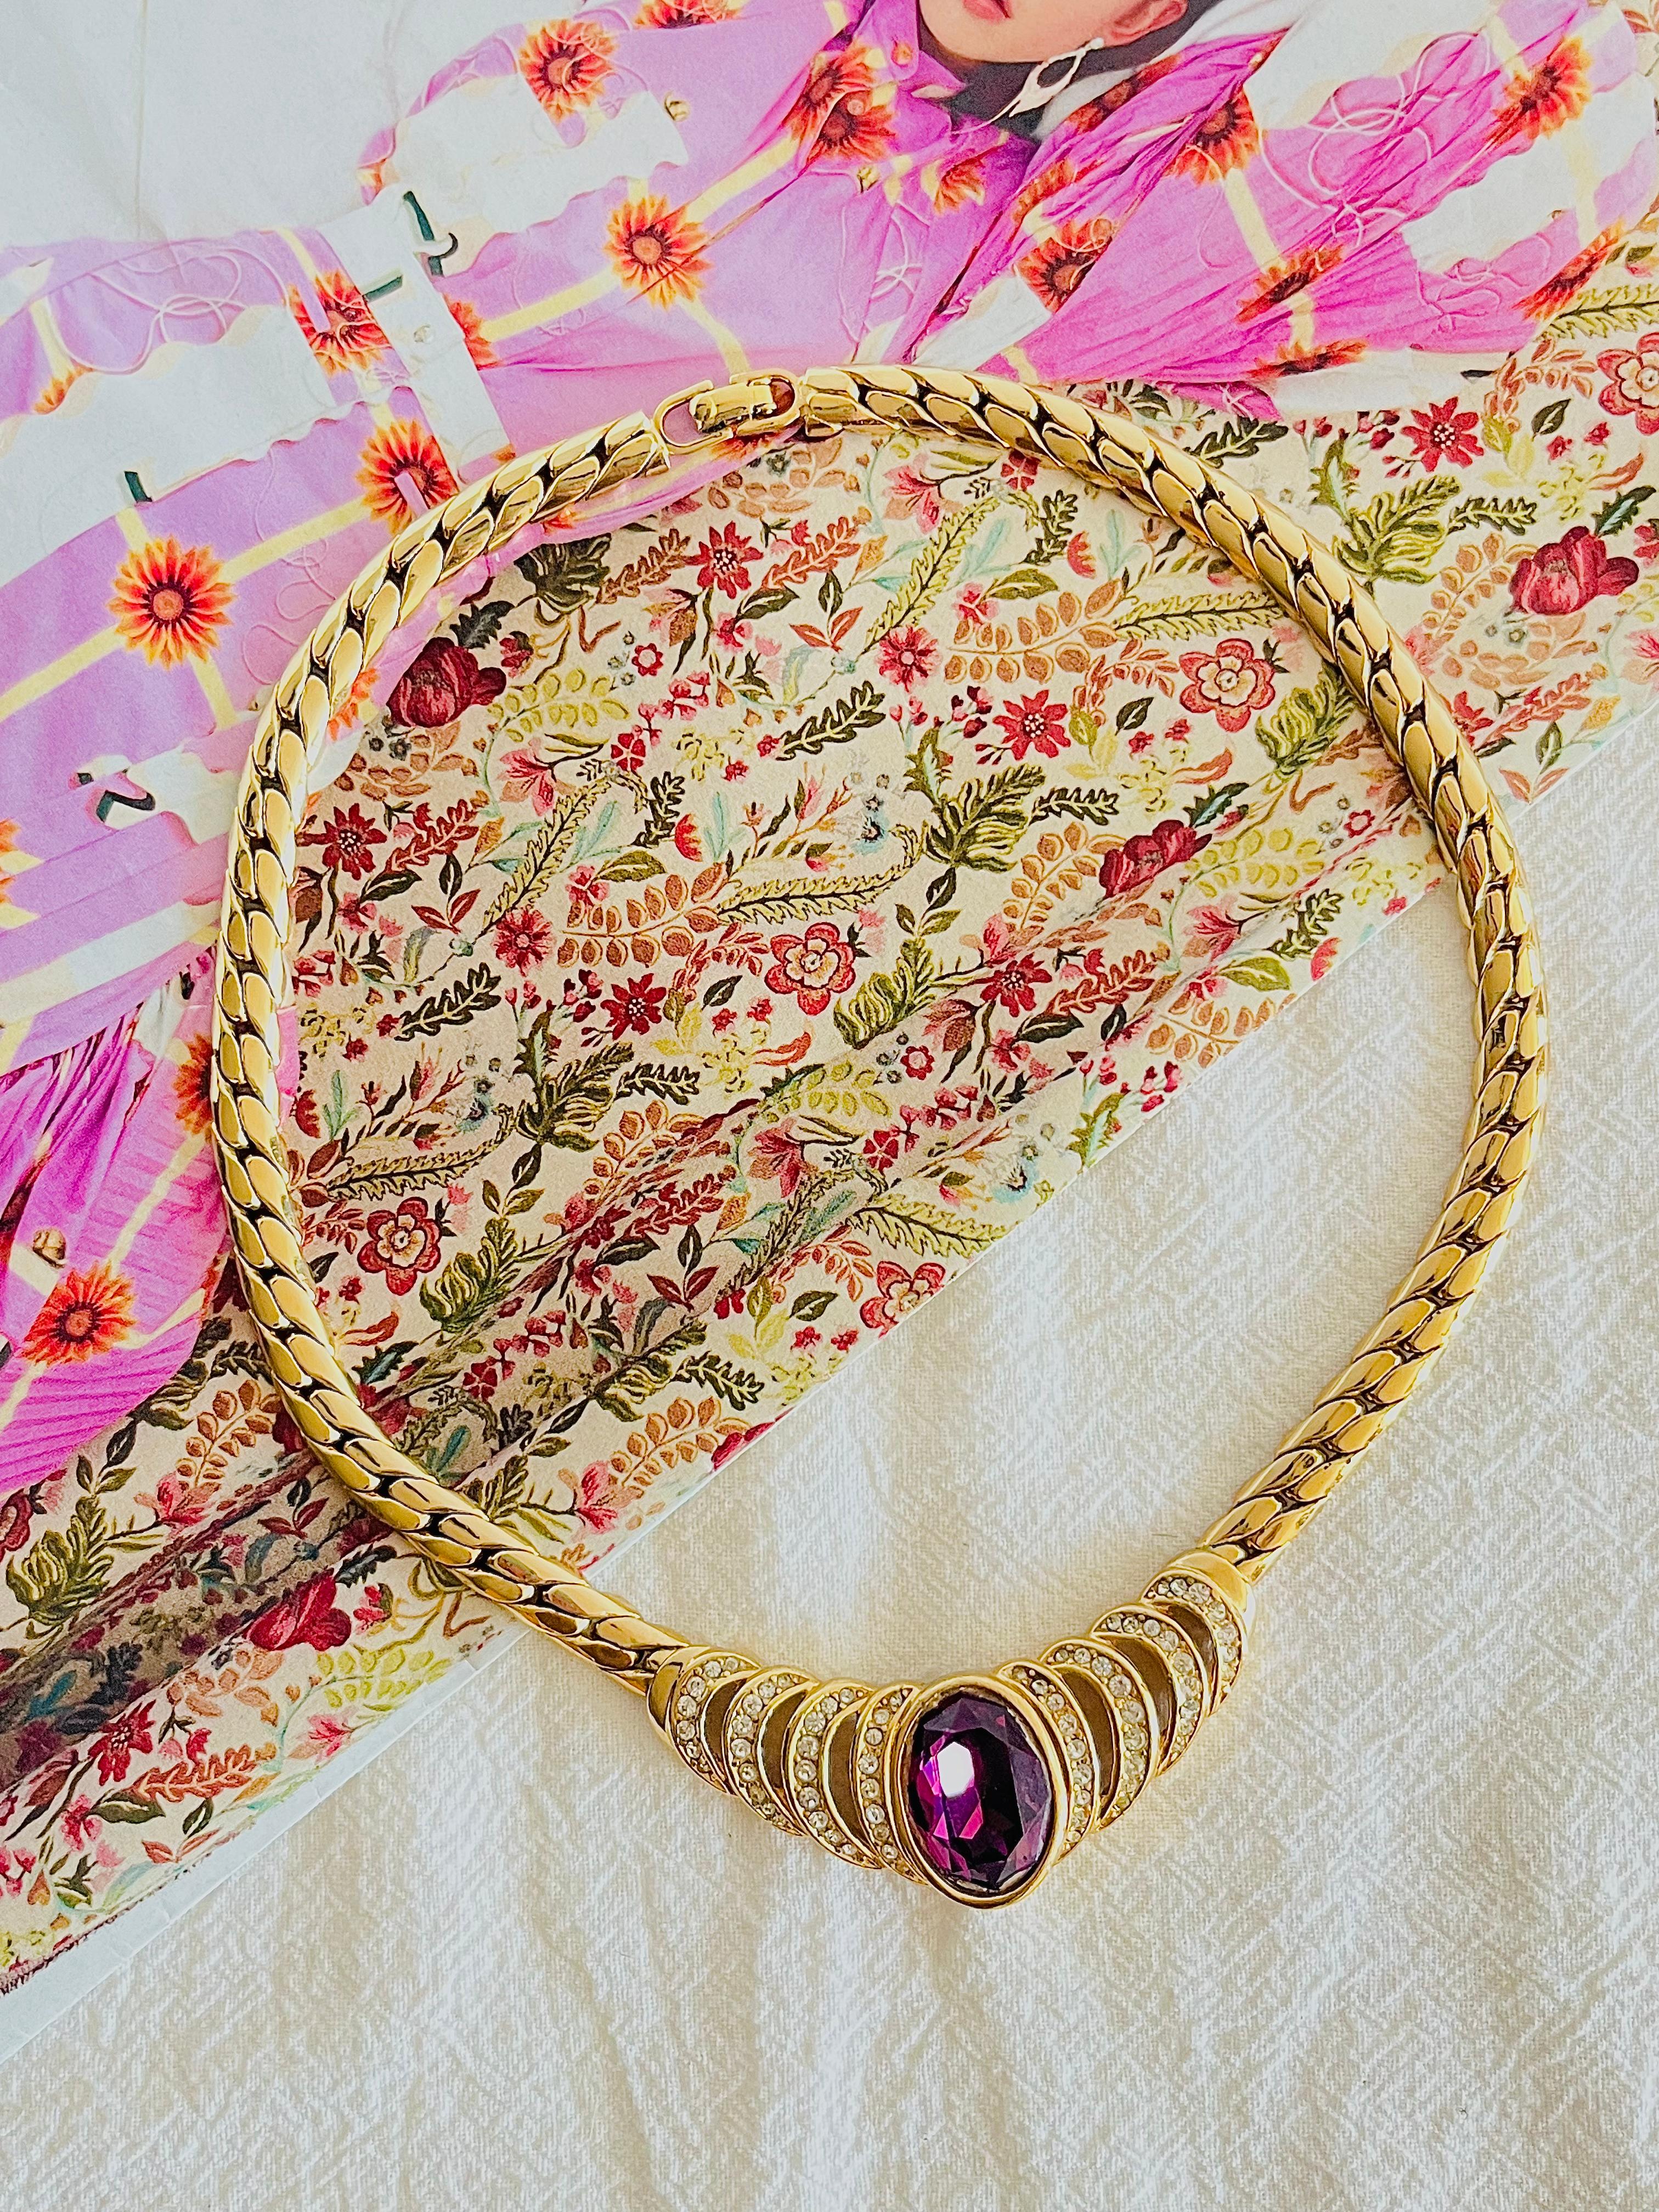 Christian Dior Vintage 1980s Large Oval Amethyst Purple Crystals Openwork Pendant Choker Necklace, Gold Tone

Very good condition. Light scratches or colour loss, barely noticeable.

Marked 'Chr.Dior (C) '. Rare to find. 100% Genuine. 

Length: 32